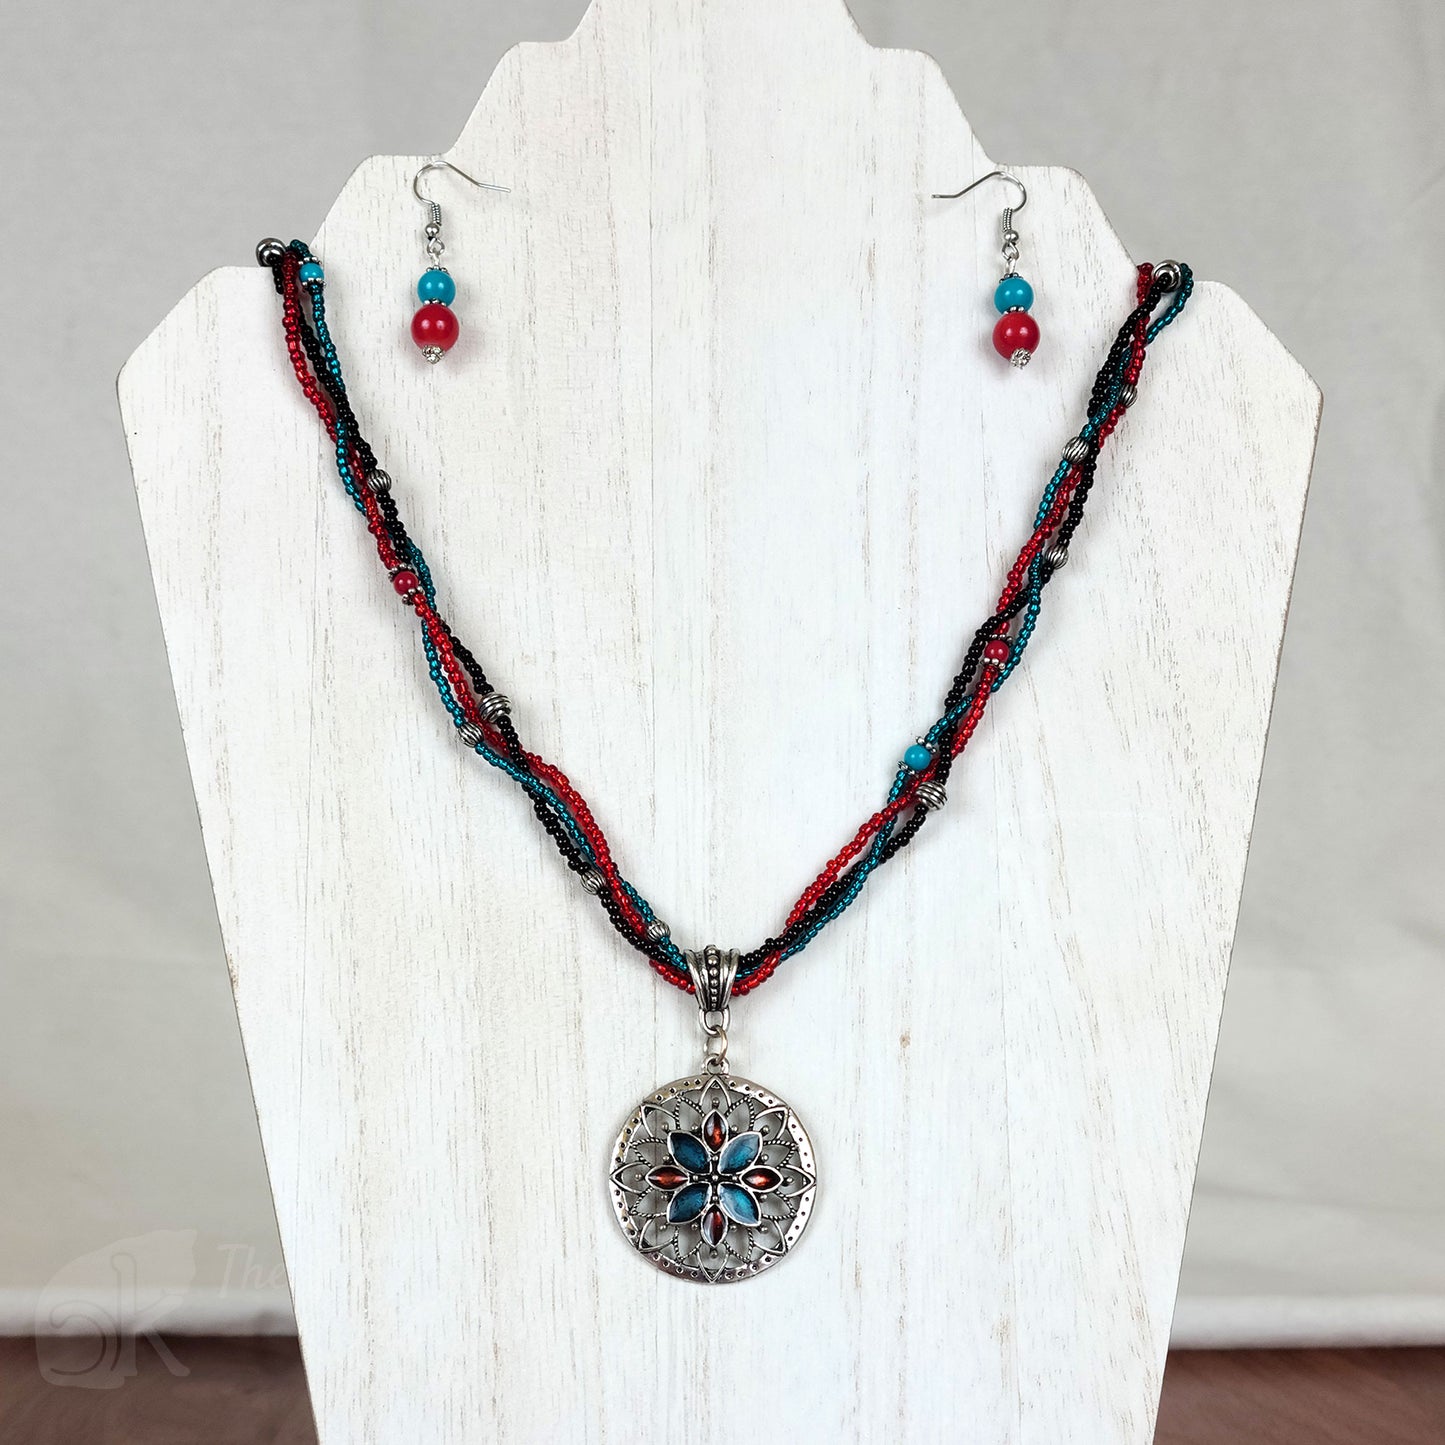 Strands of turquoise, red, and black glass seed beads loosely braided into a strand supporting an antique silver flower pendant filled with turquoise and red enamel; matching turquoise and red resin bead earrings